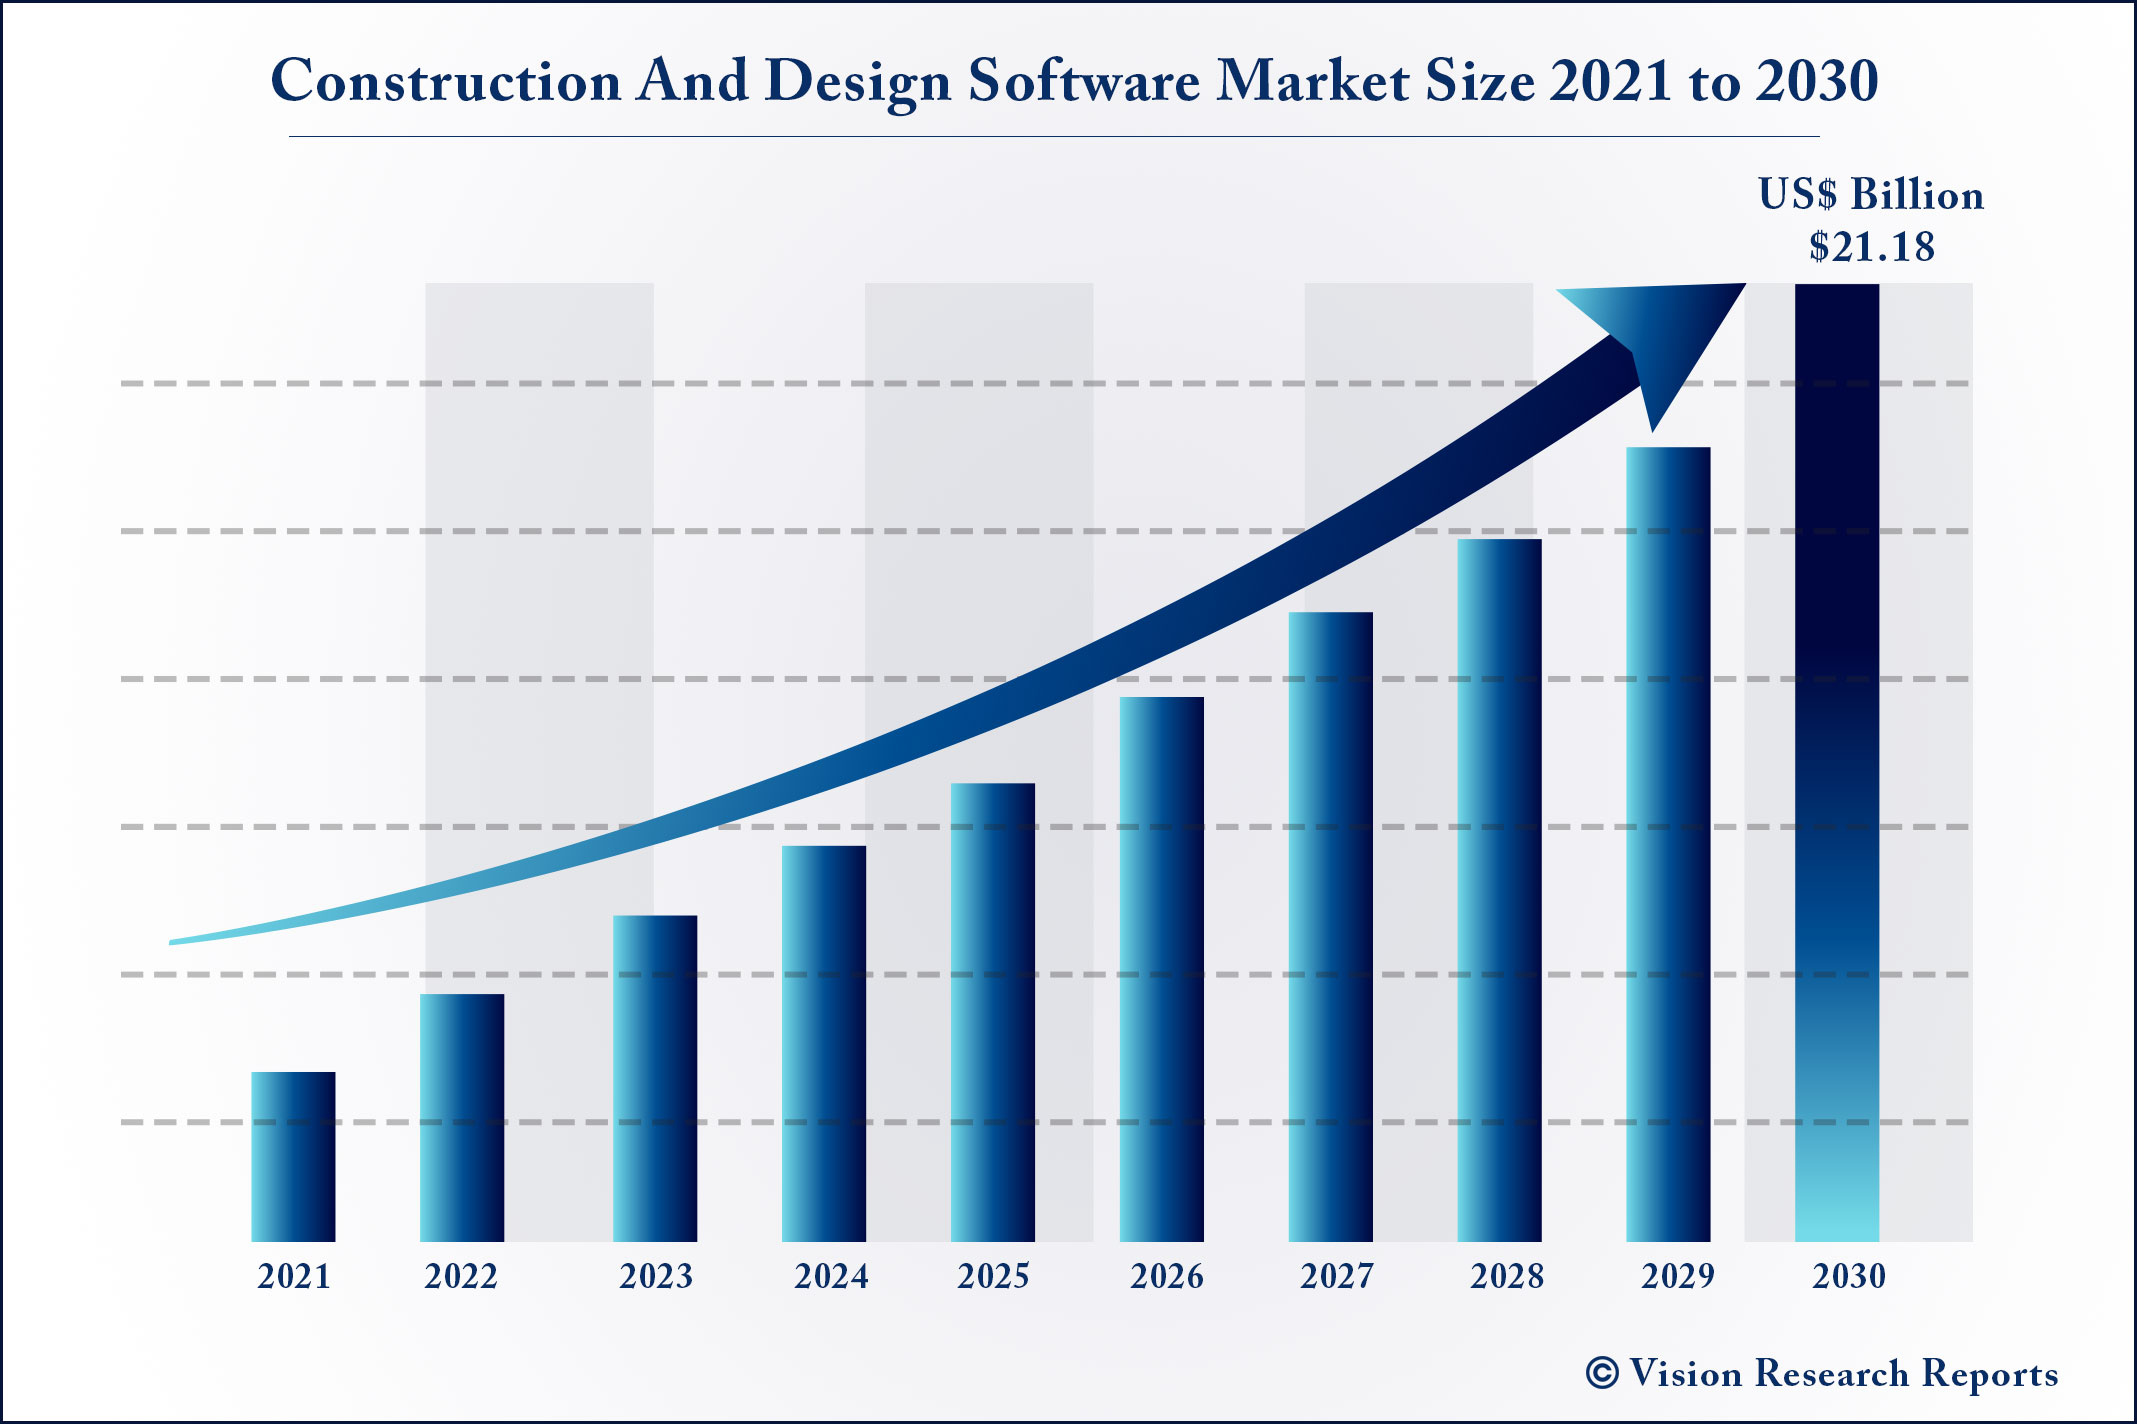 Construction And Design Software Market Size 2021 to 2030